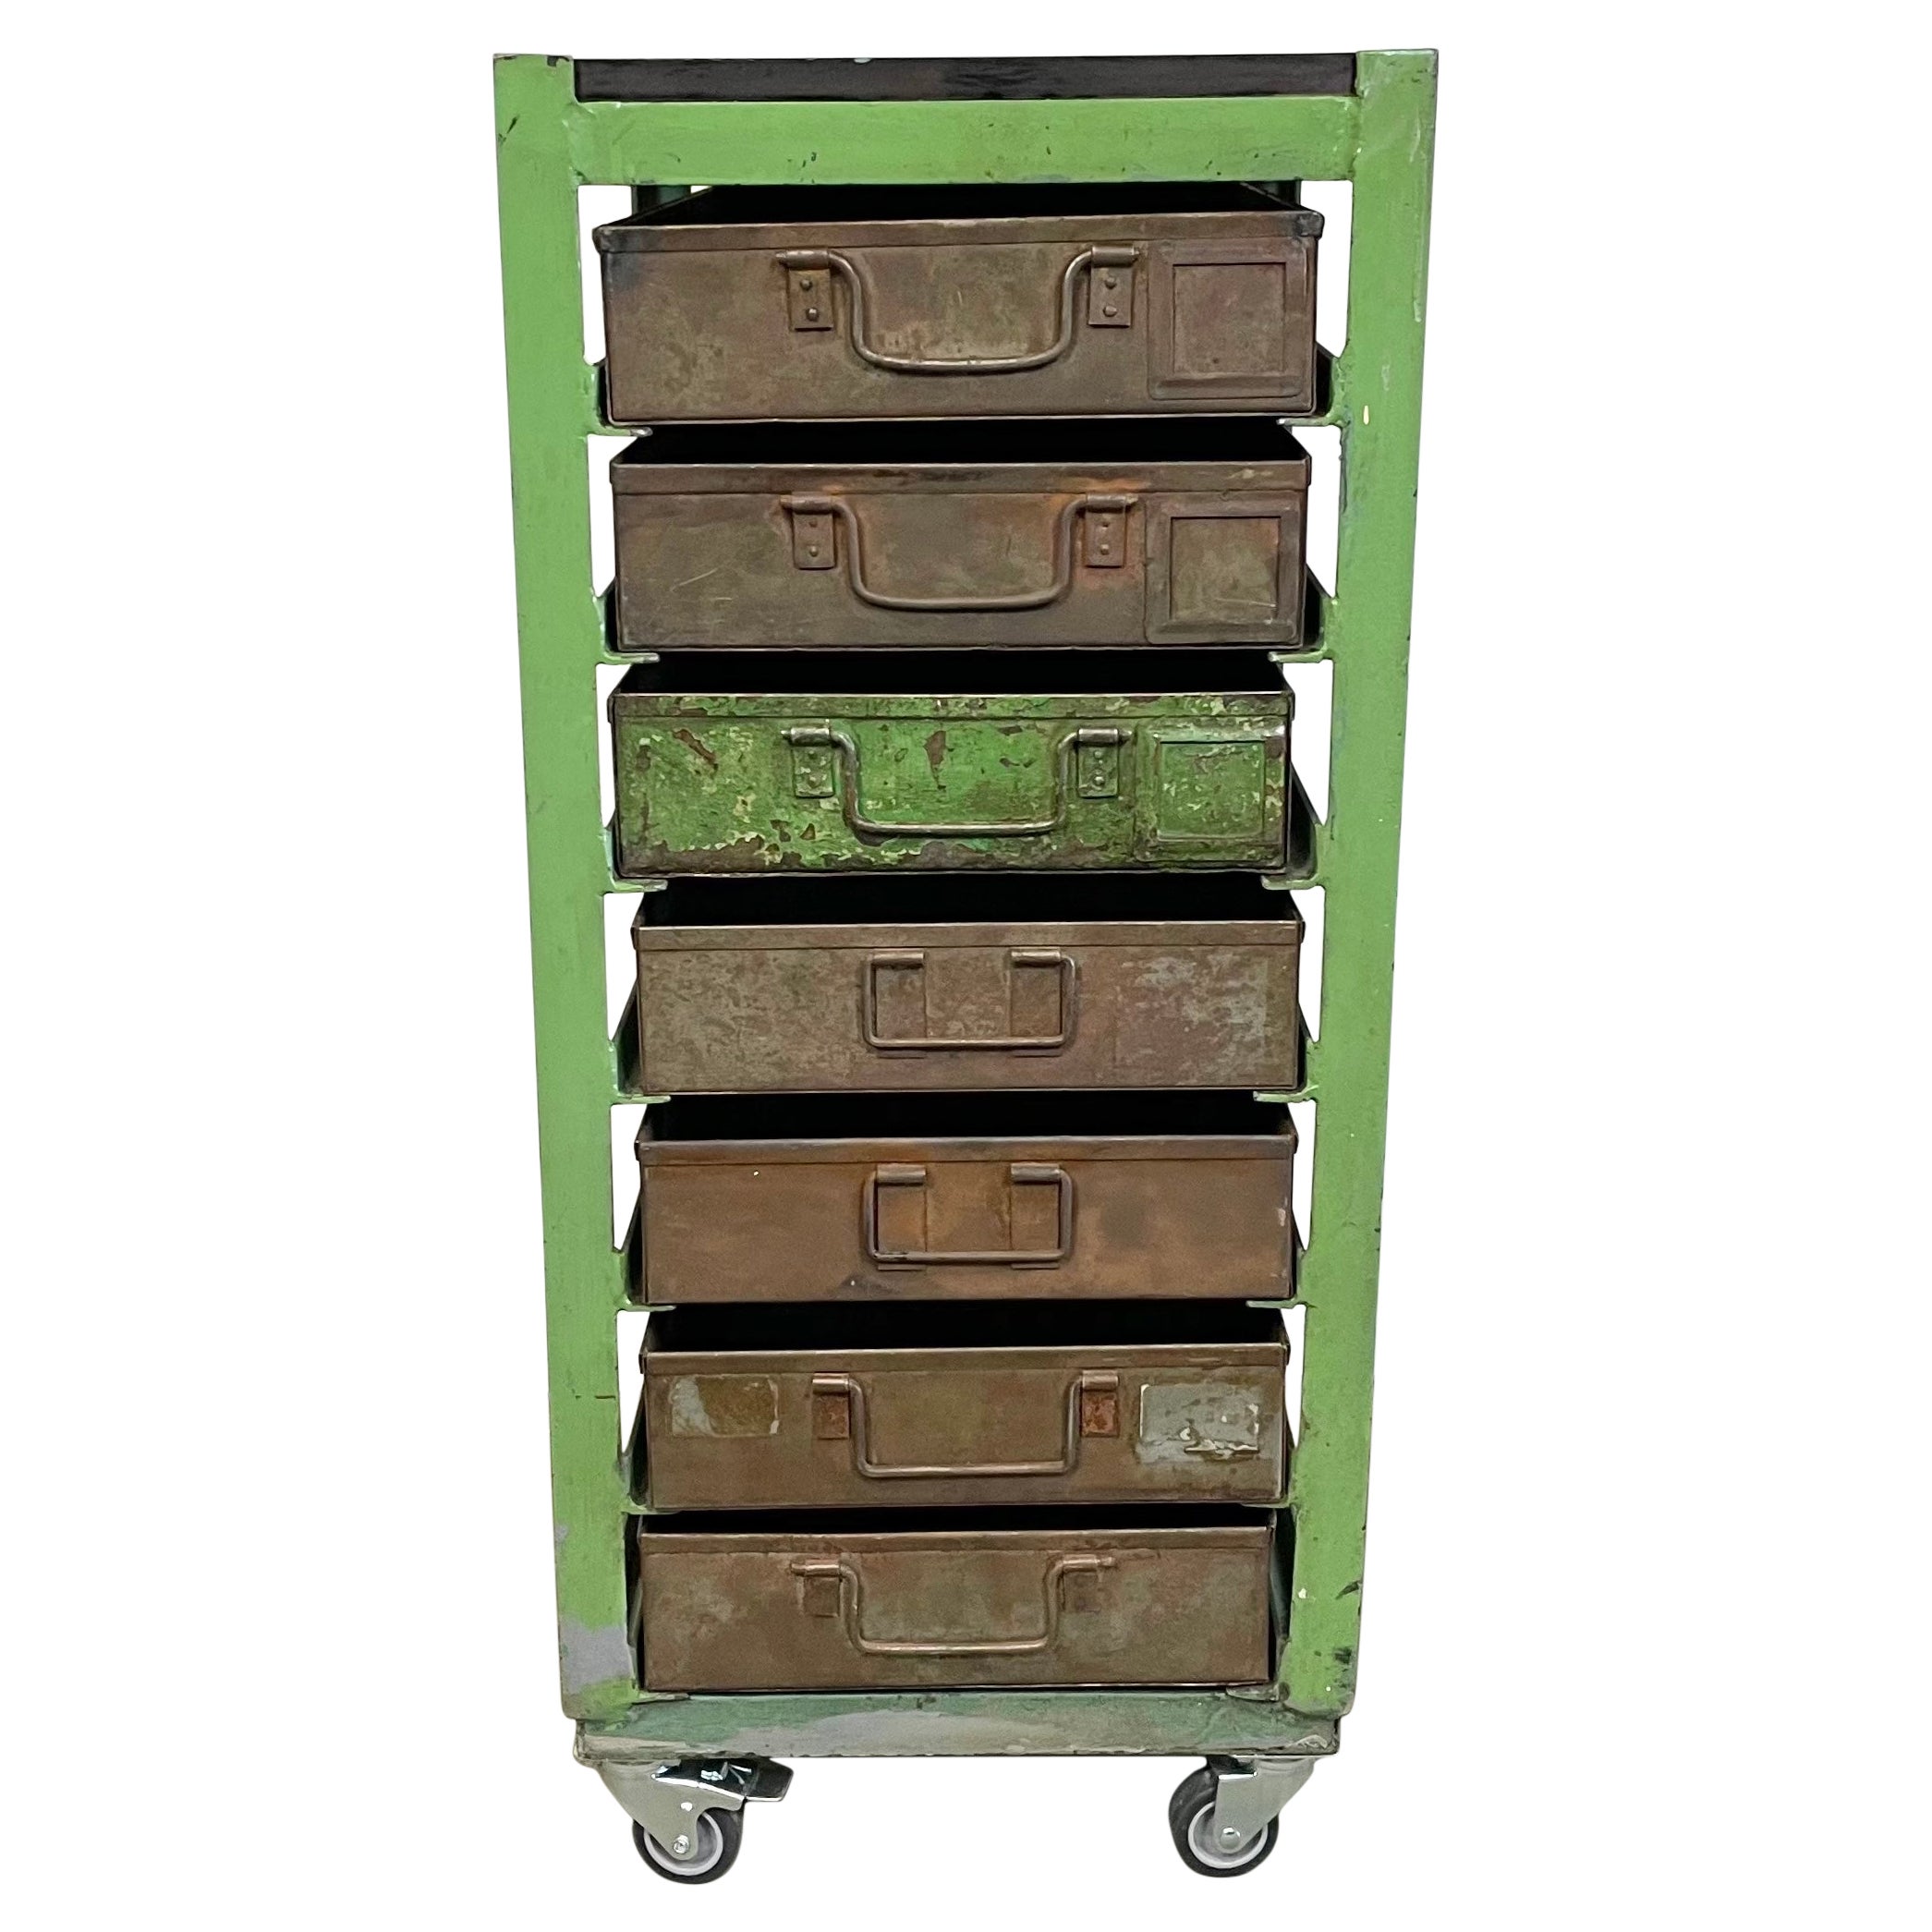 Vintage Green Industrial Iron Chest of Drawers on Wheels, 1950s